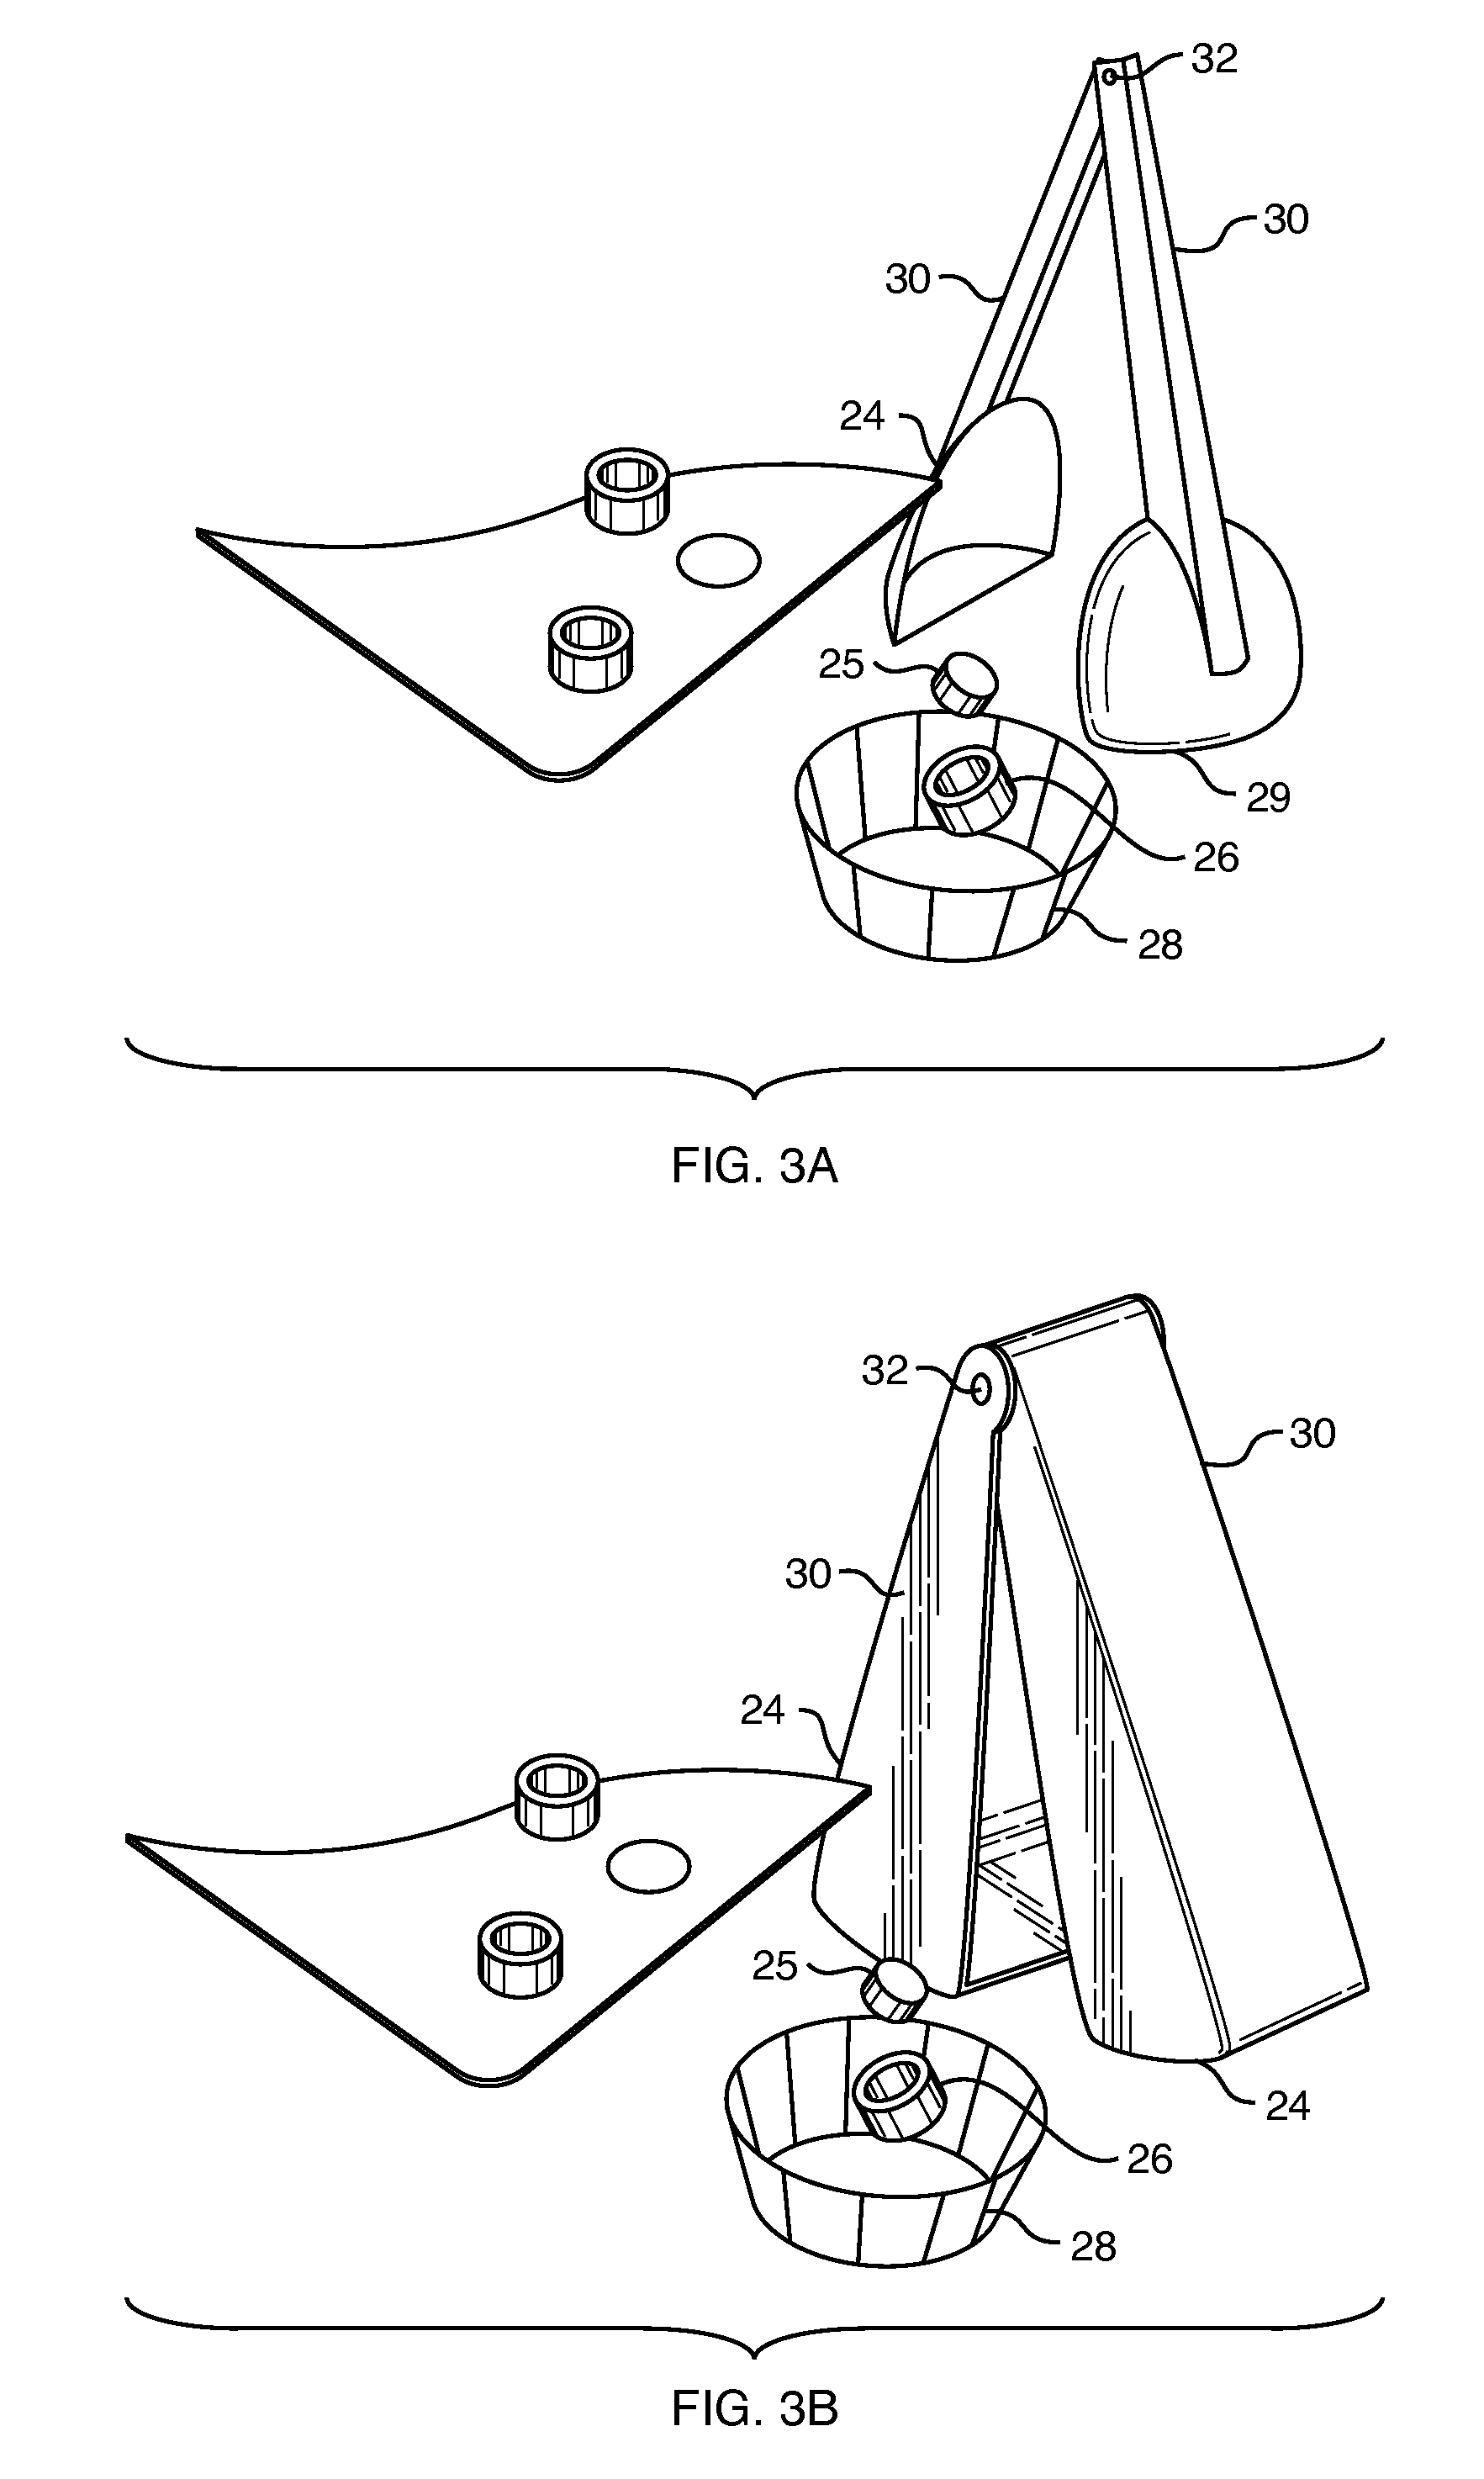 Method and device for dispensing articles from blister packs